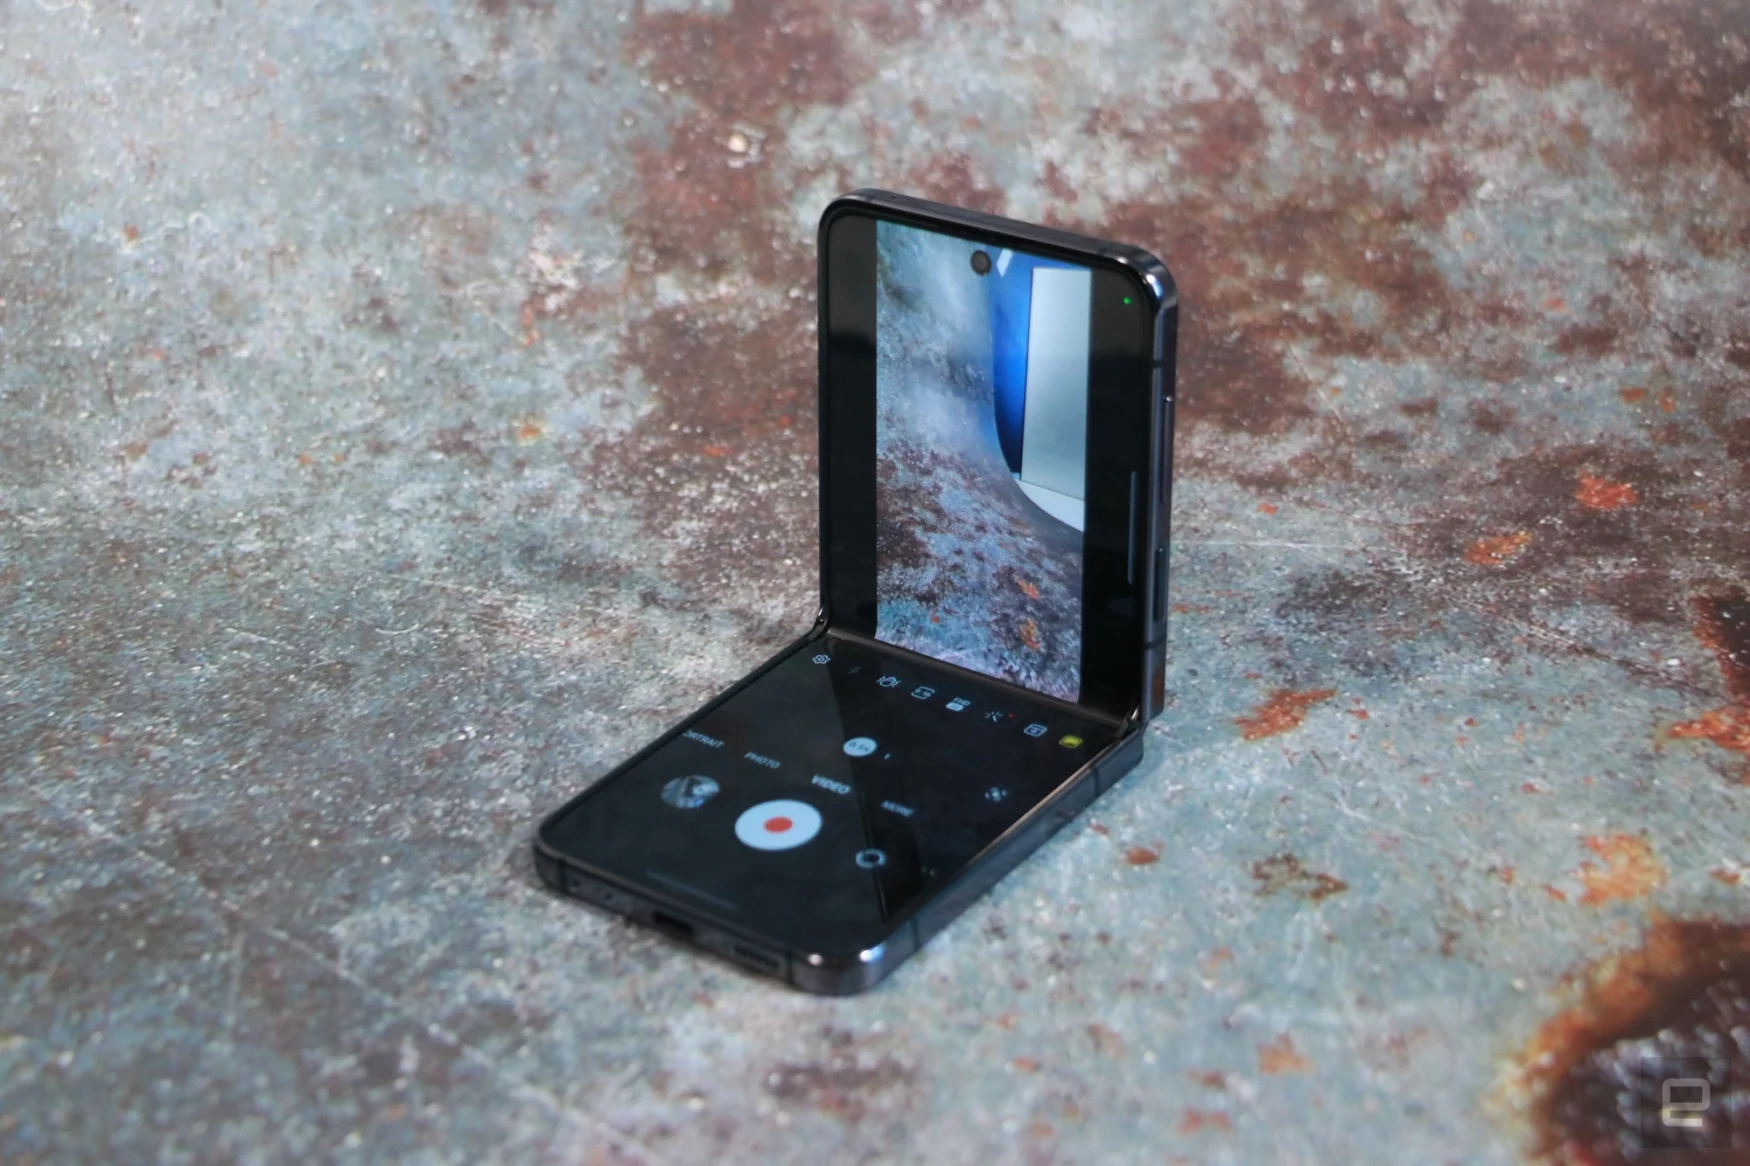 The Samsung Galaxy Z Flip 5 flexed at a 90-degree angle, with its internal display showing the camera app.